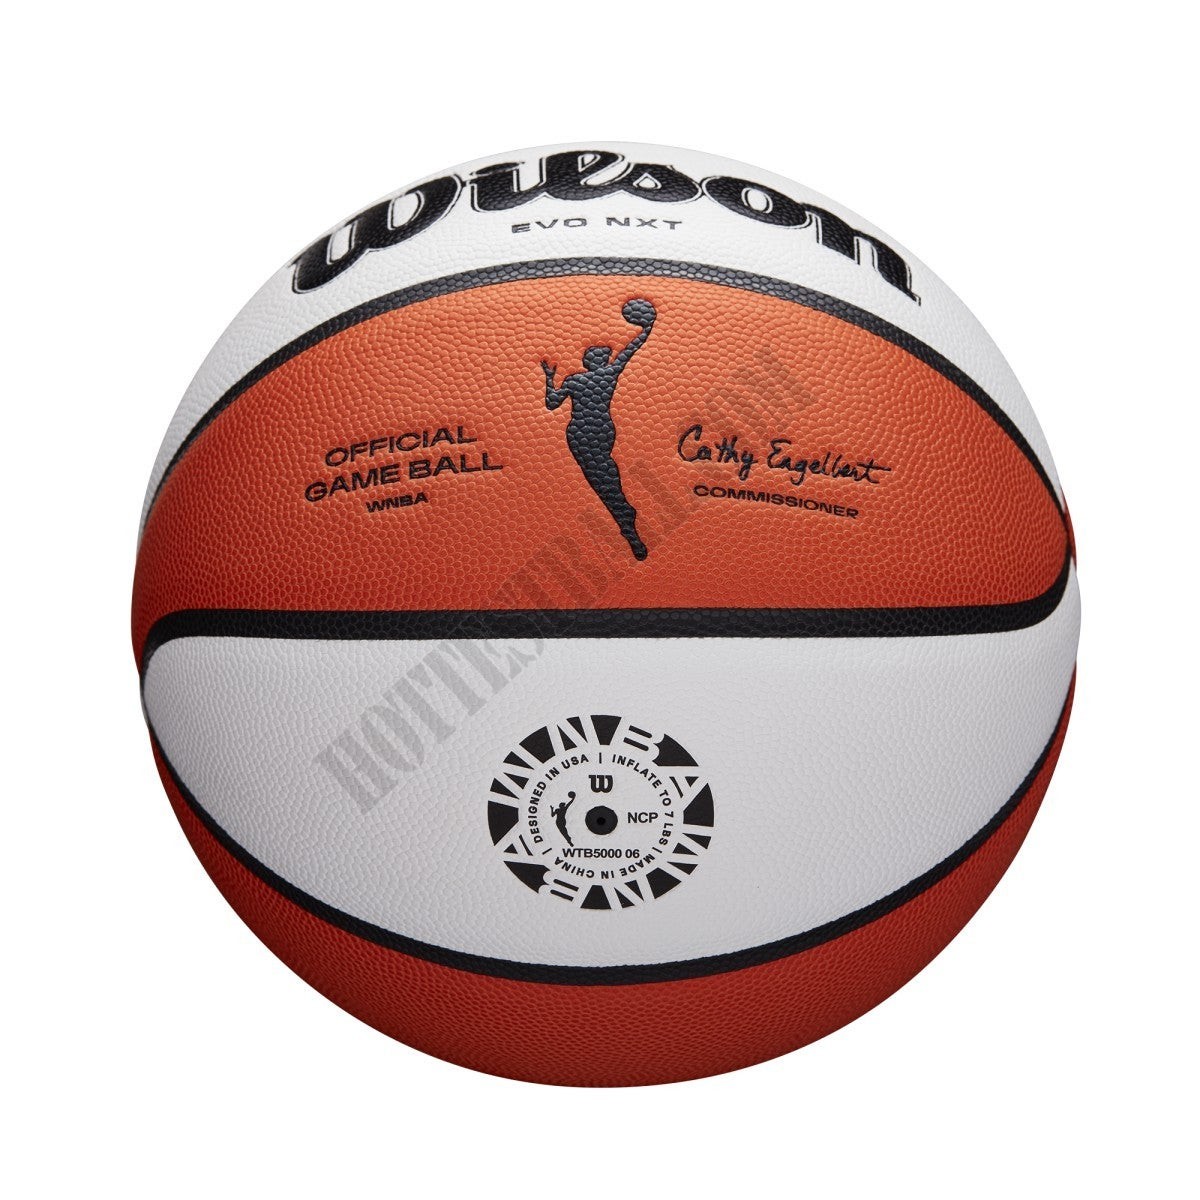 WNBA Official Game Basketball - Wilson Discount Store - -1